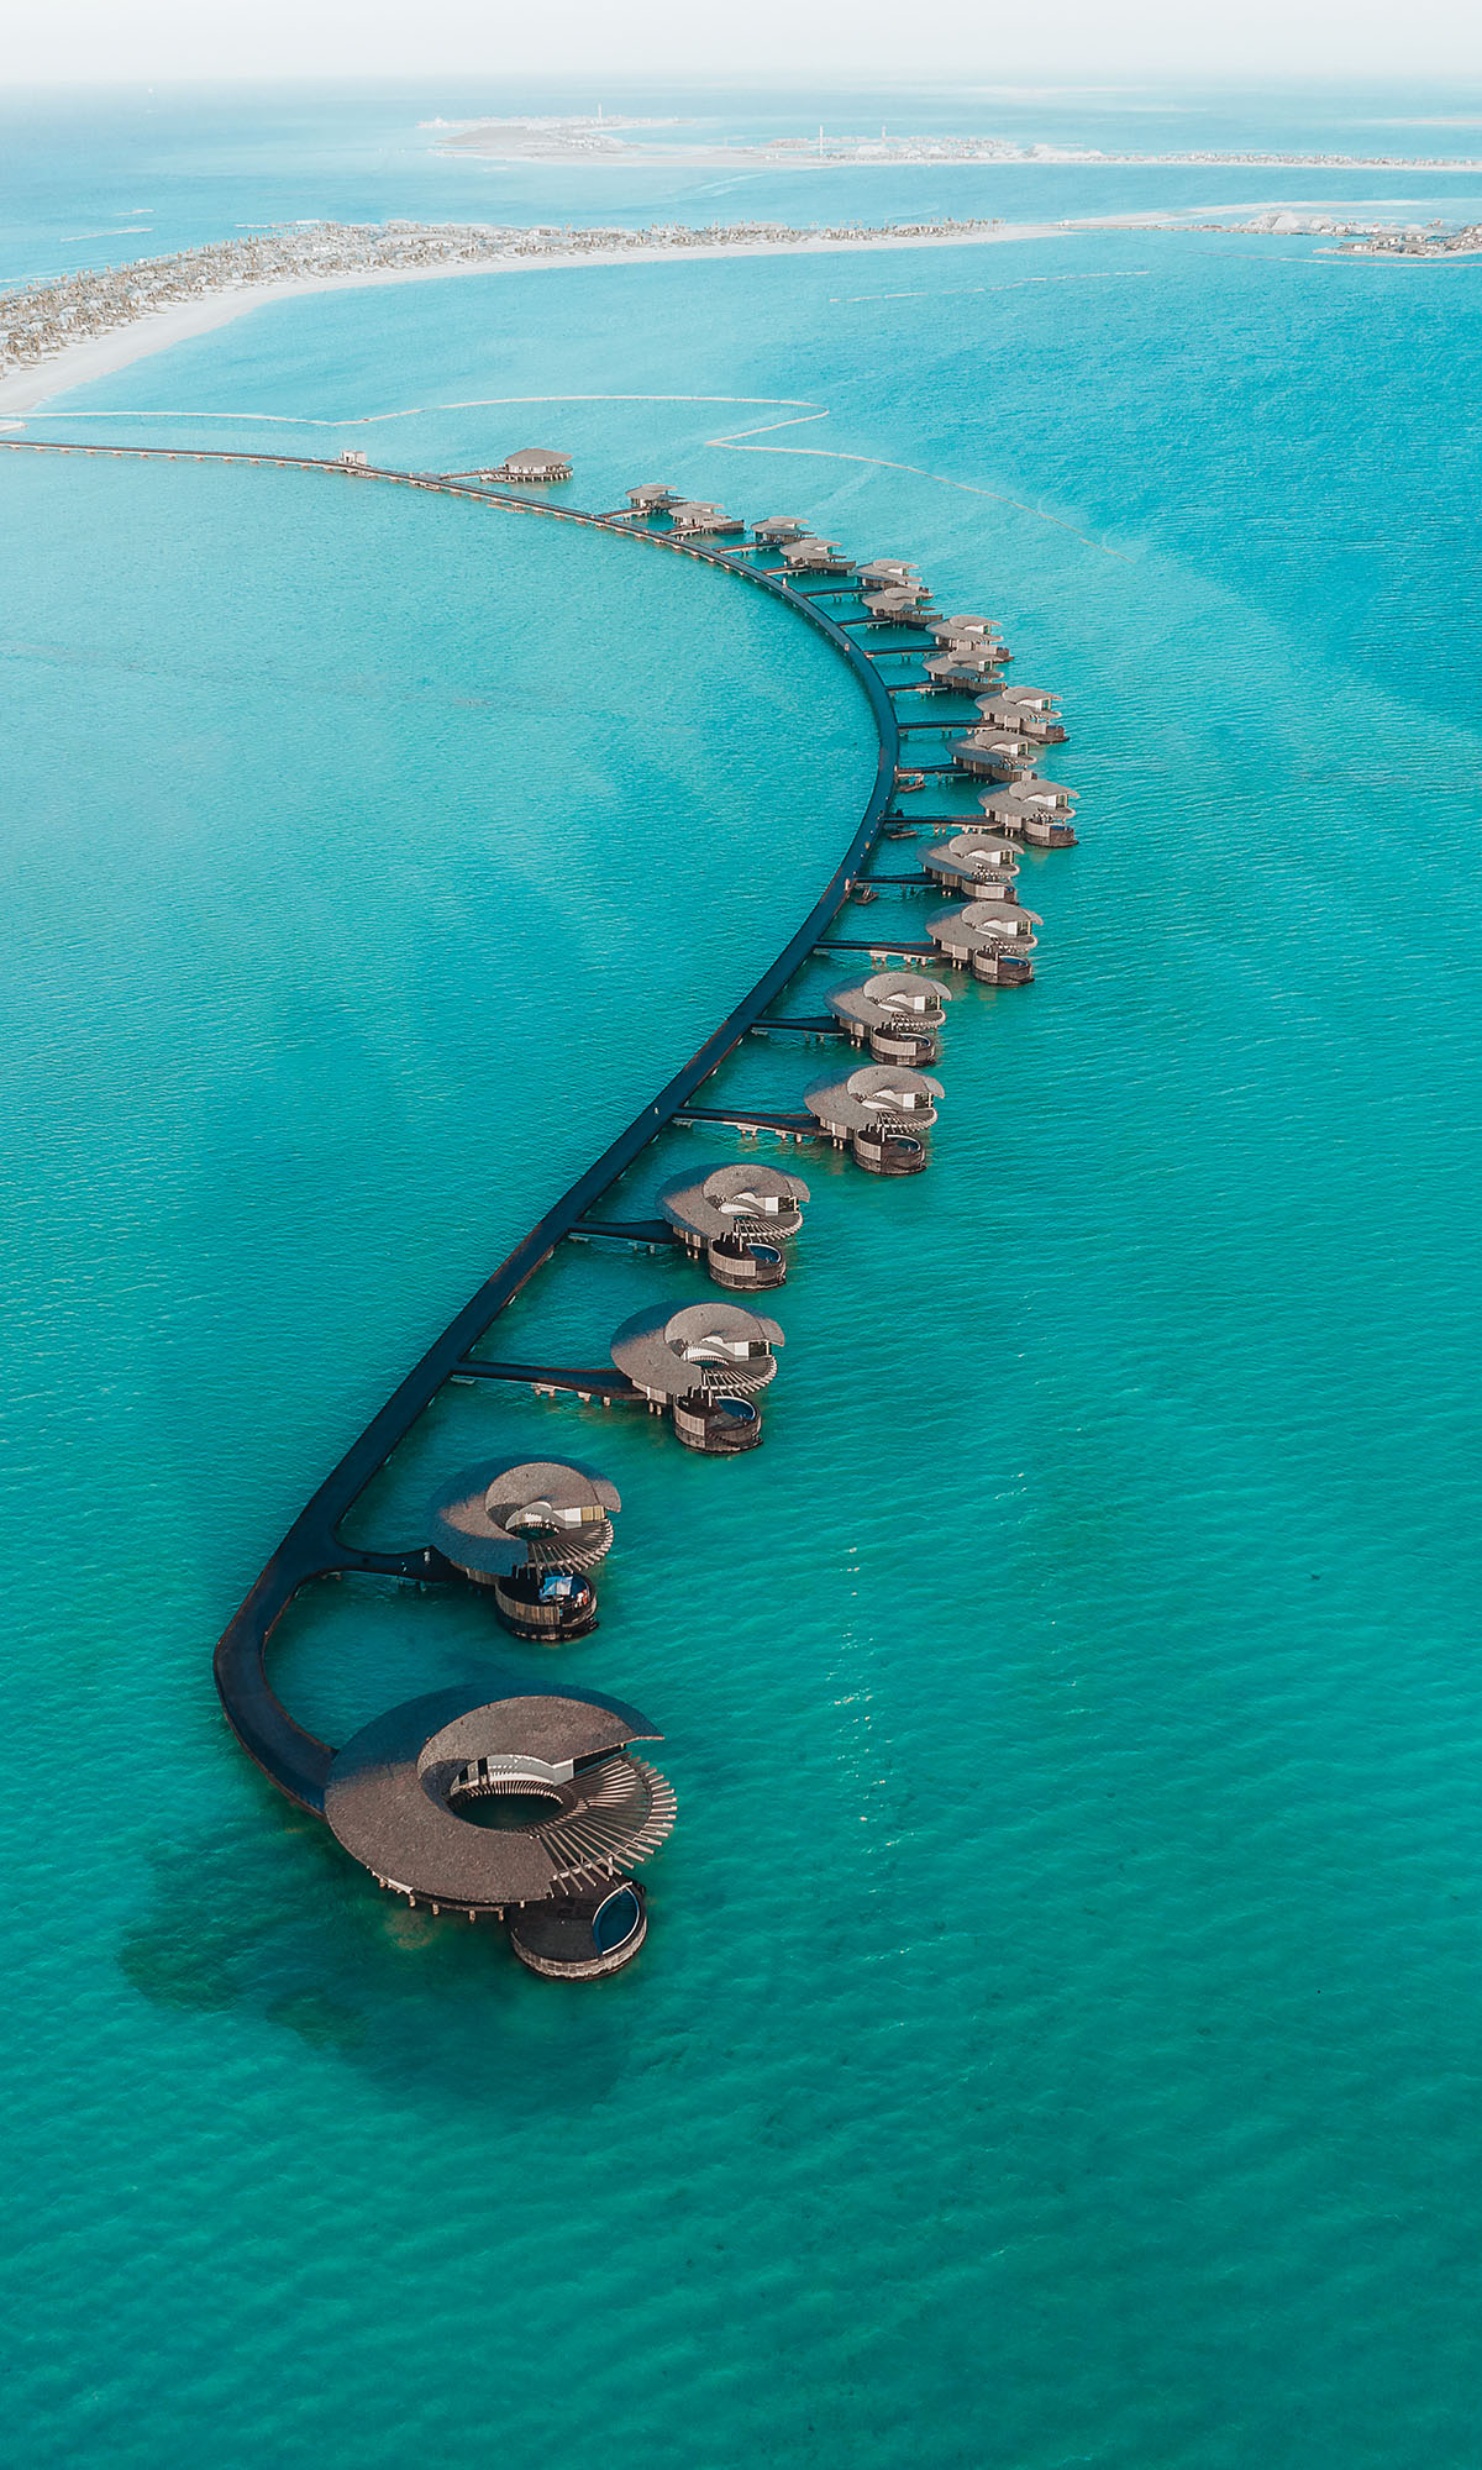 Aerial view of the water villas in the Red Sea